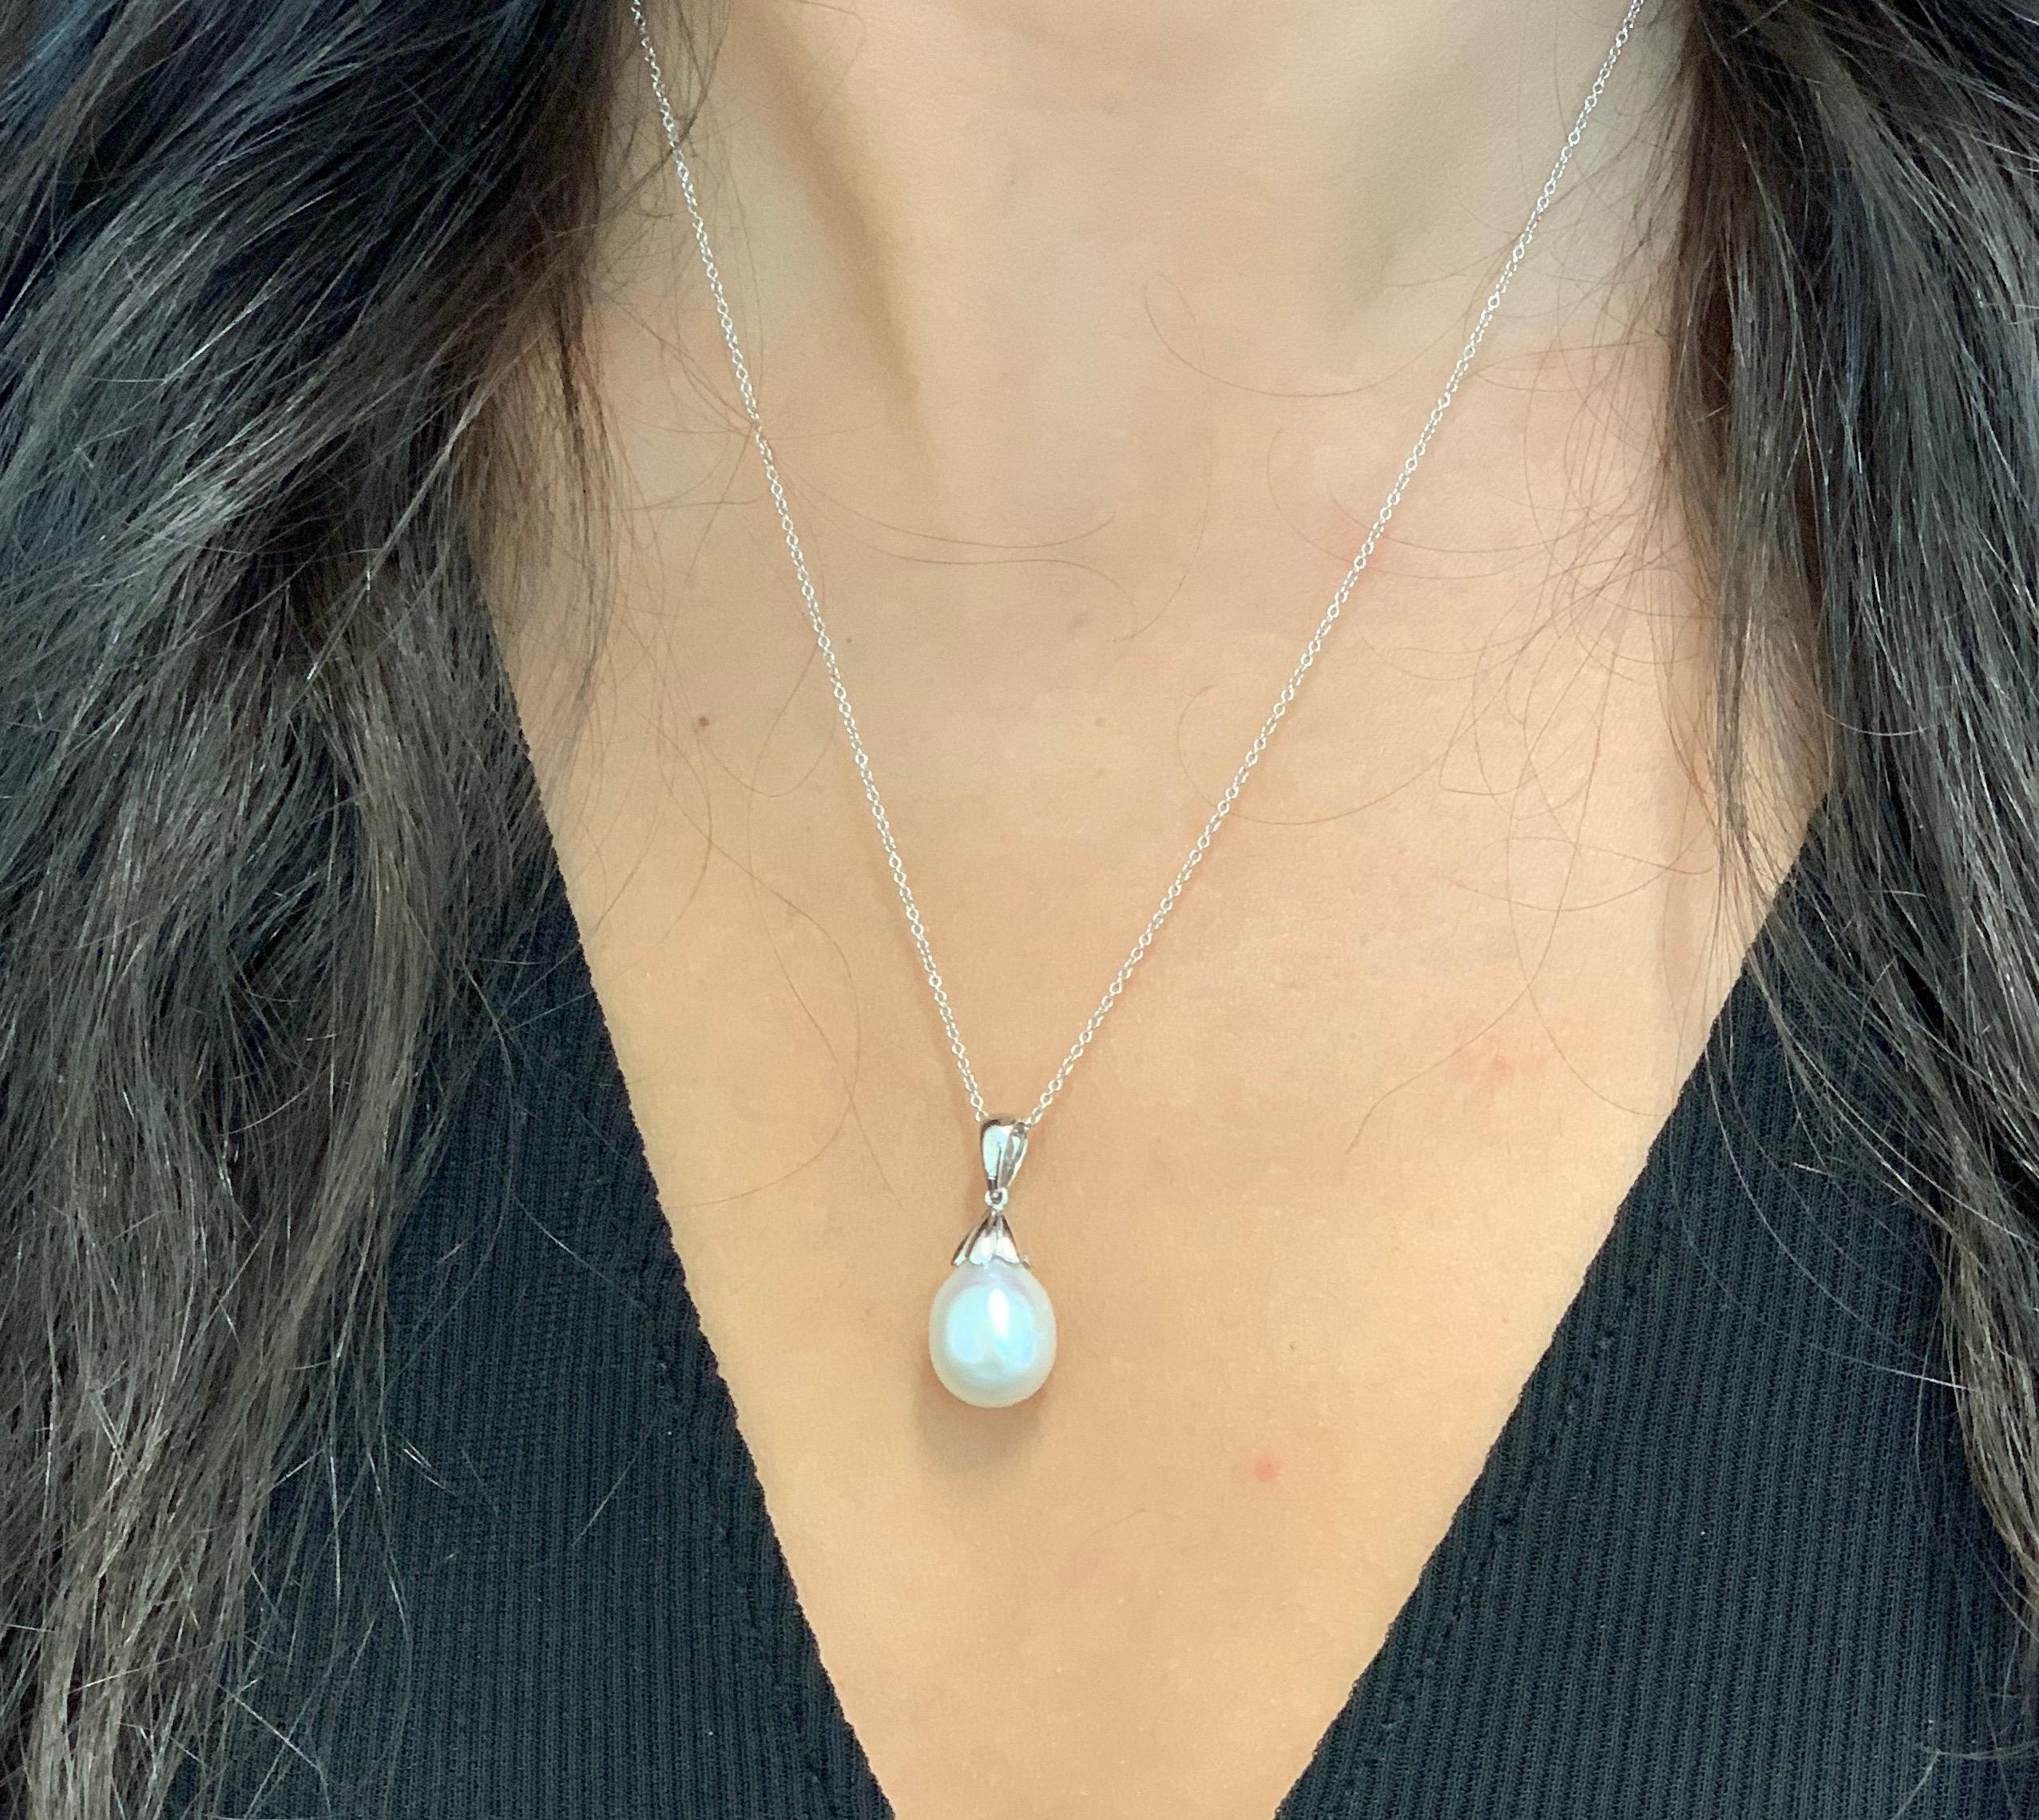 Material: 14K White Gold
Center Stone Details: 1 Pearl at 11.50 Carats Total

Fine one-of-a-kind craftsmanship meets incredible quality in this breathtaking piece of jewelry.

All Alberto pieces are made in the U.S.A and include a lifetime